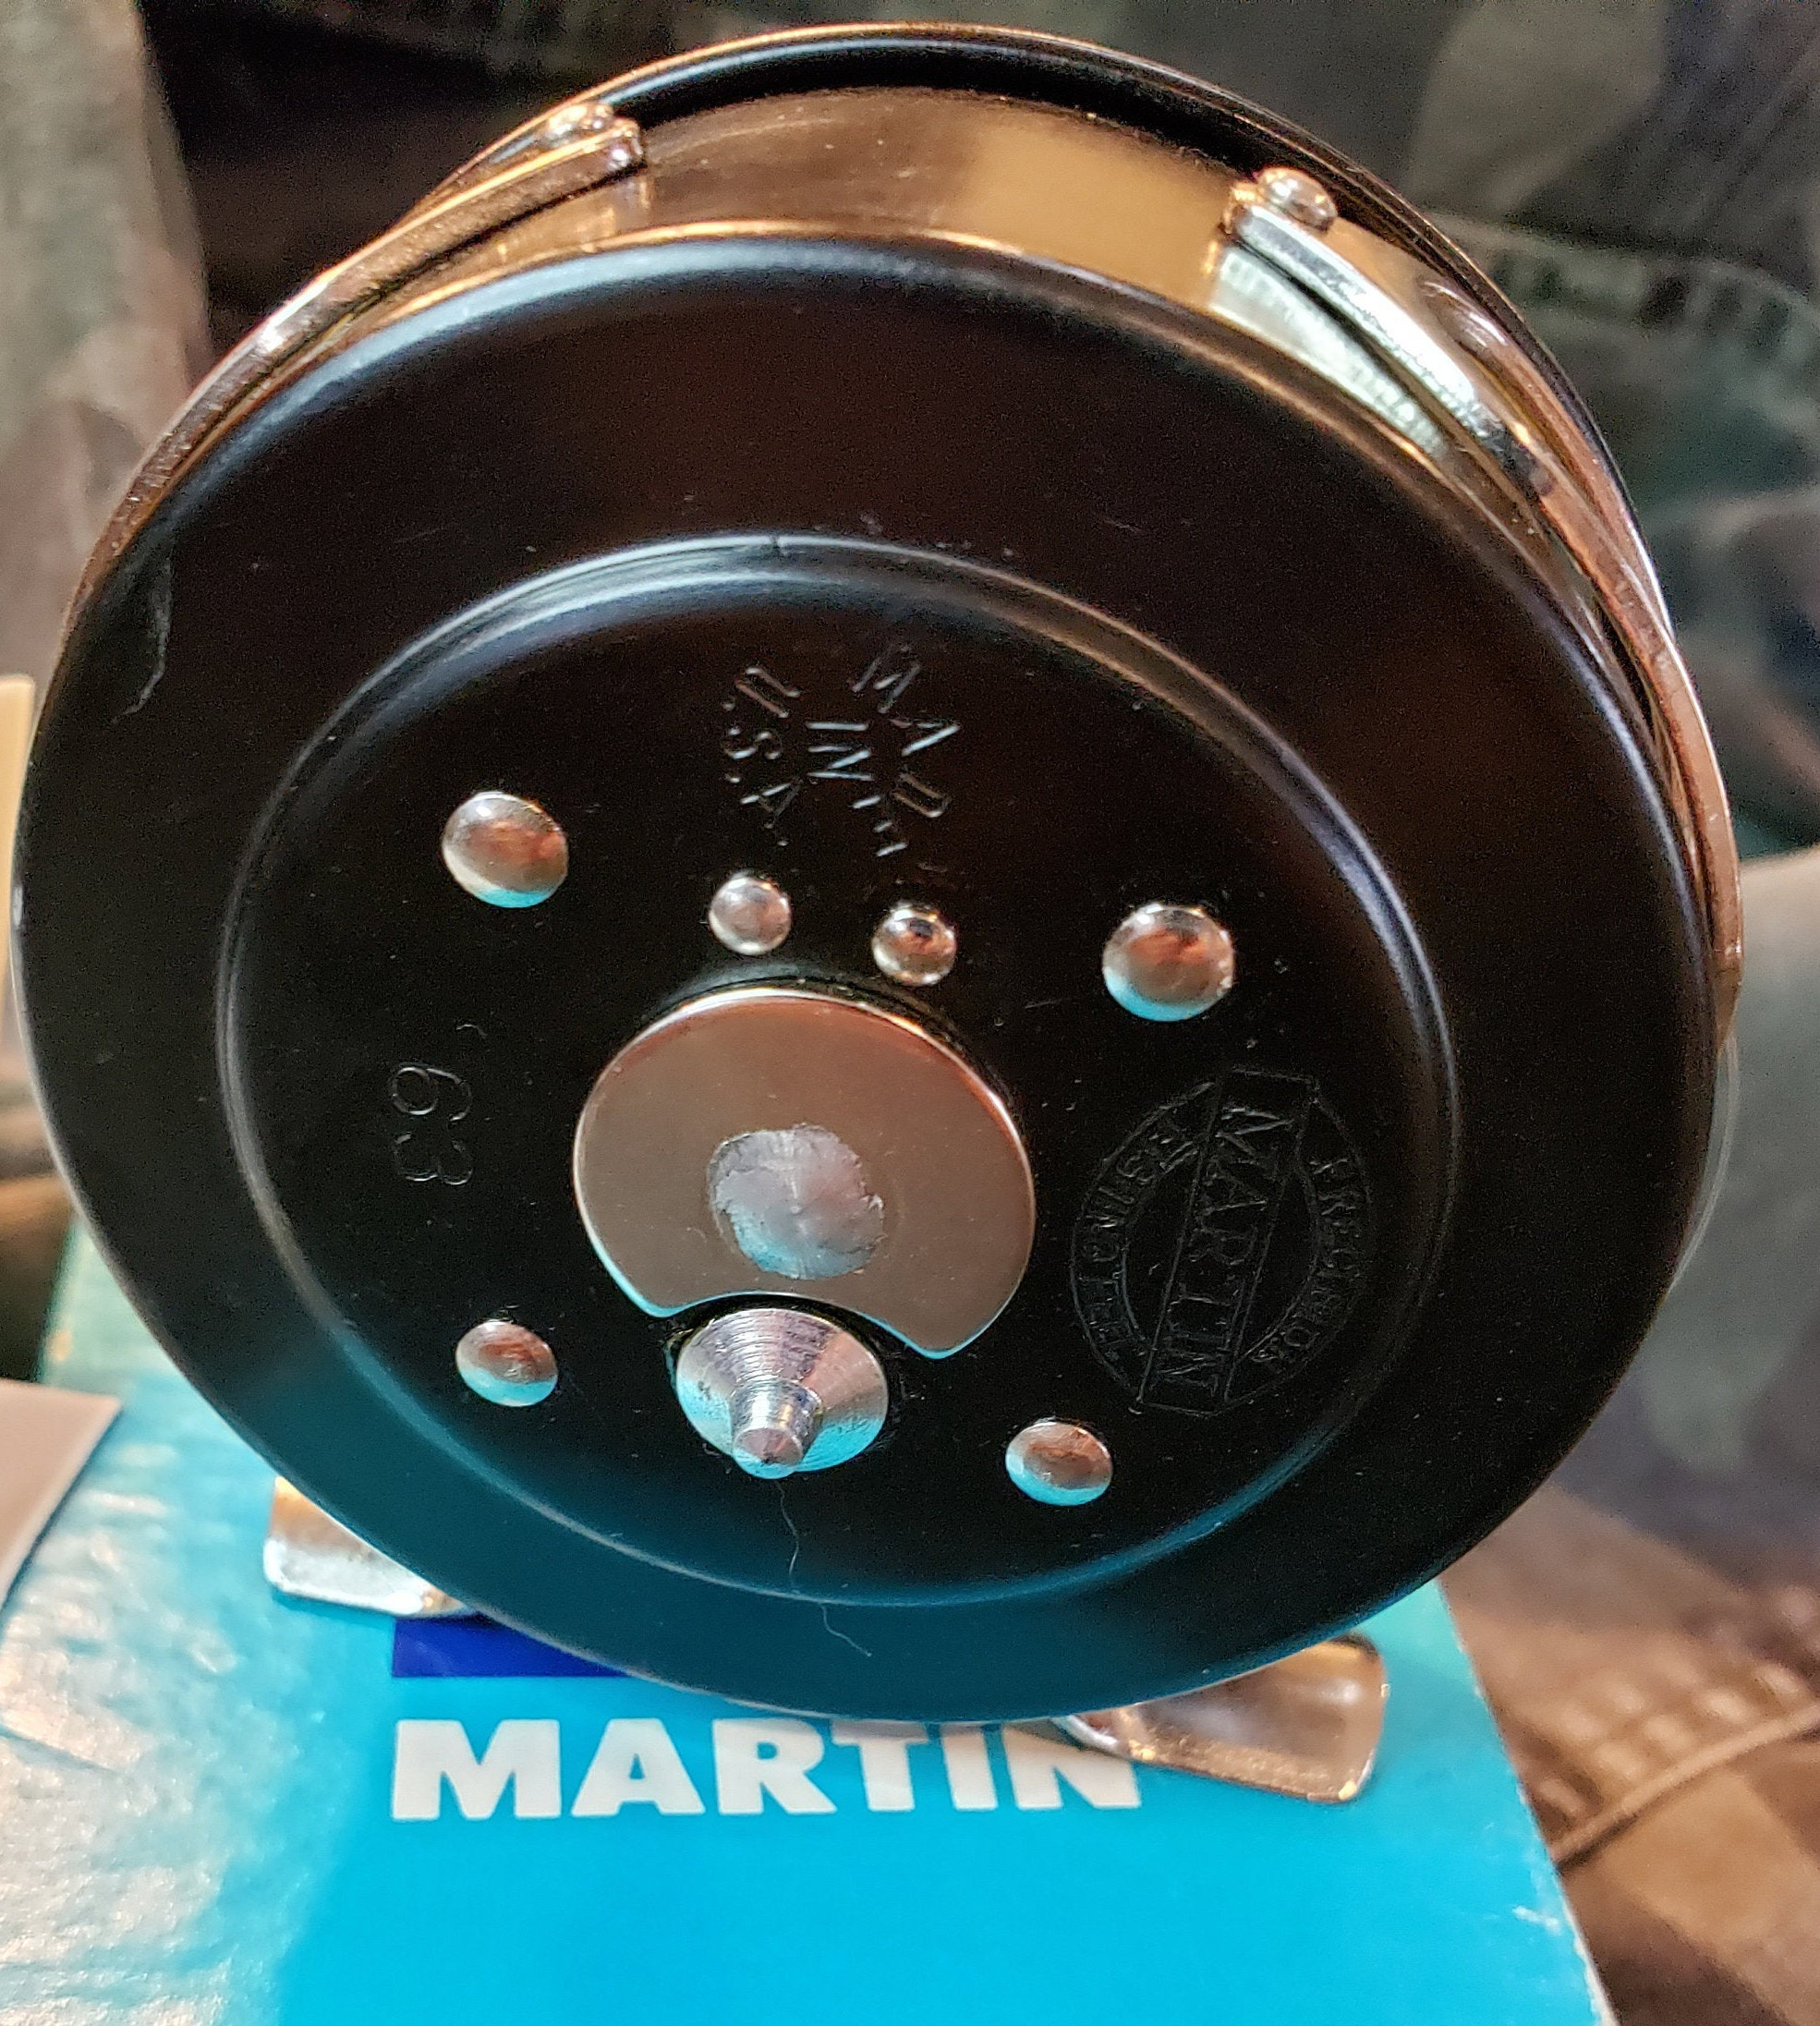 Attic Esoterica on X: Vintage Classic Martin 63 Fly Fishing Reel Original  Box IOB with Instructions Retro Tackle  #  #AtticEsoterica #Vintage #Collectibles #Antiques #VintageMartinReel   / X